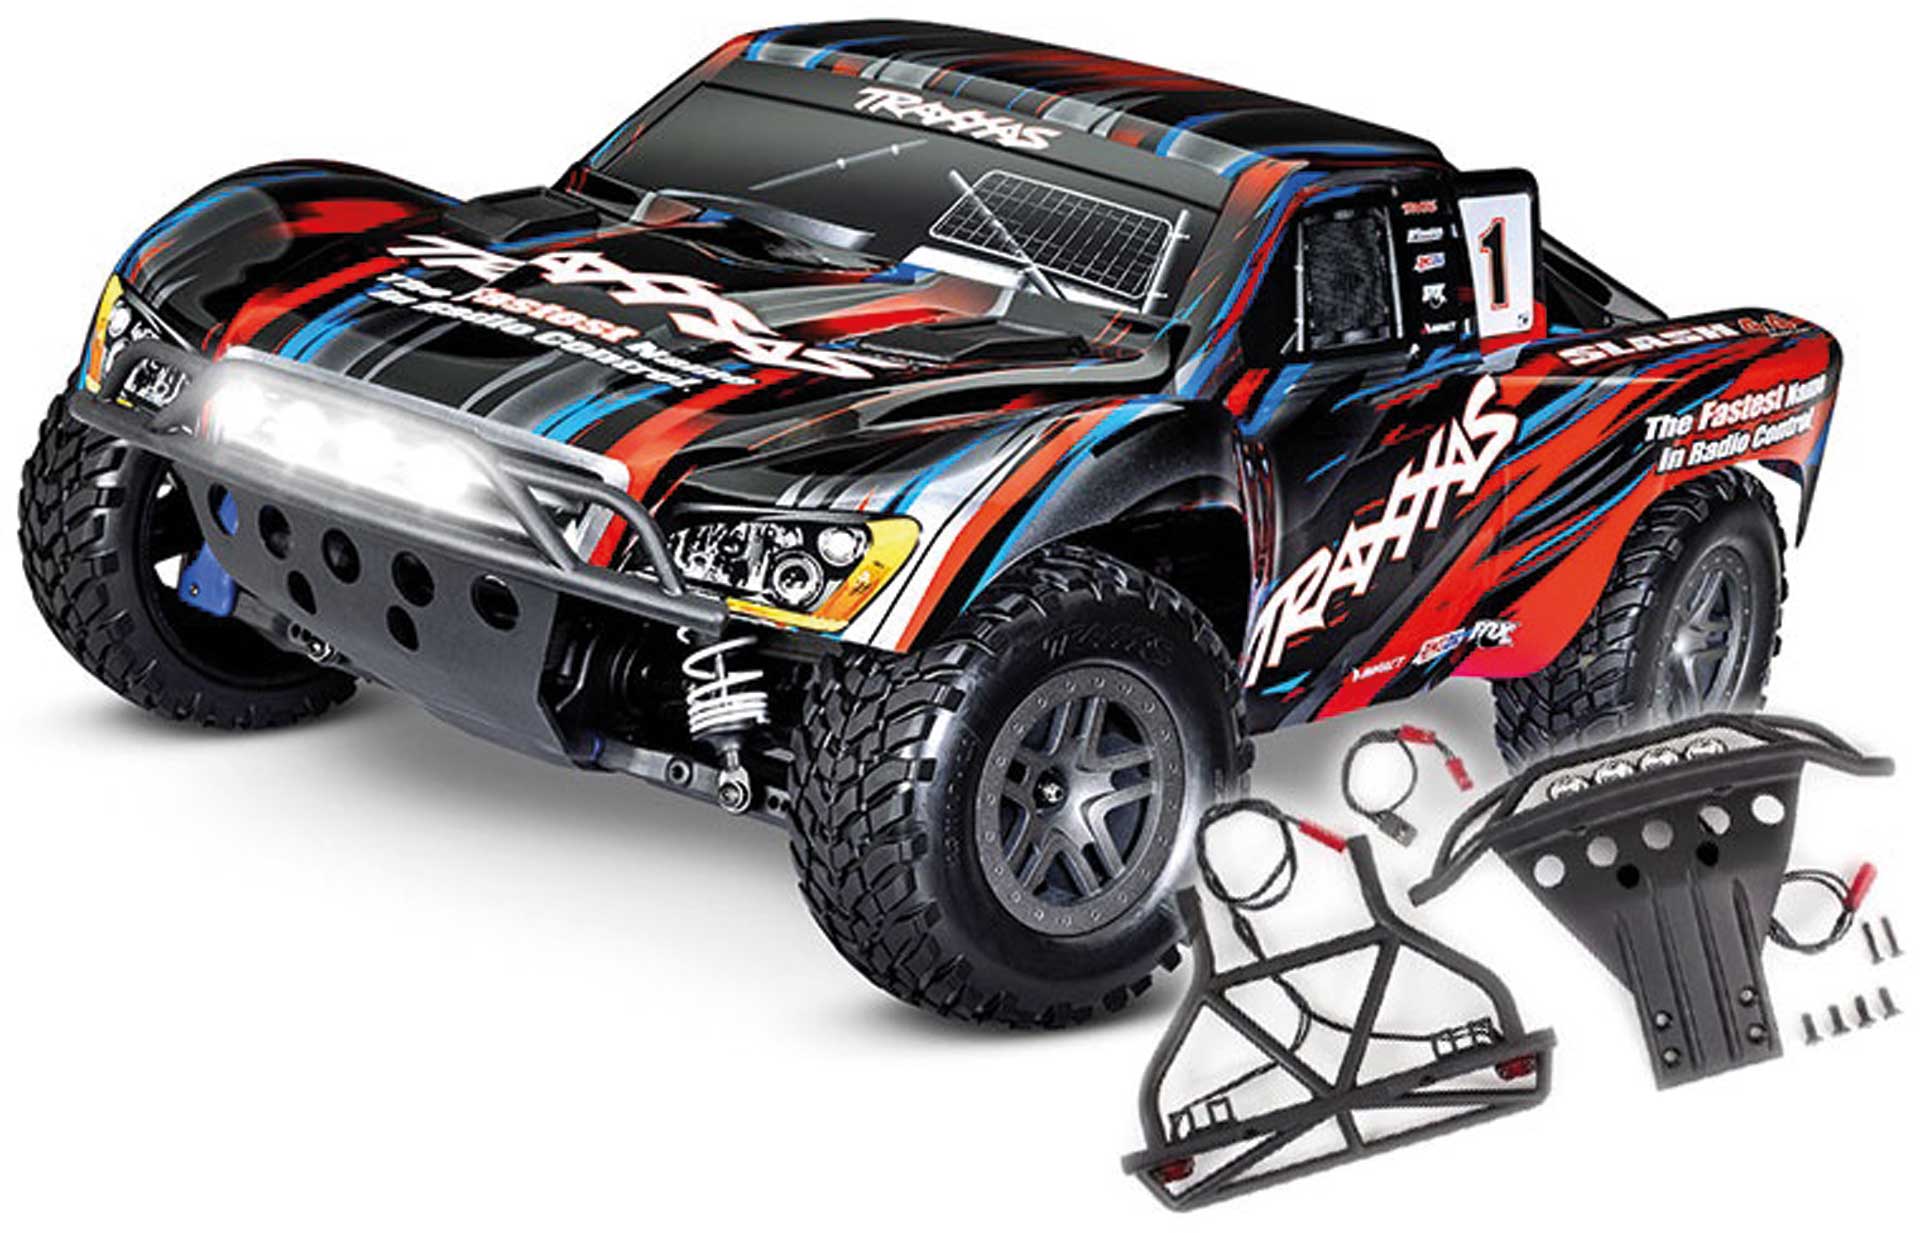 TRAXXAS SLASH 4X4 BL-2S RED 1/10 SHORT-COURSE RTR BL-2S BRUSHLESS, HD-PARTS, WITHOUT BATTERY/CHARGER + FREE LED-SET